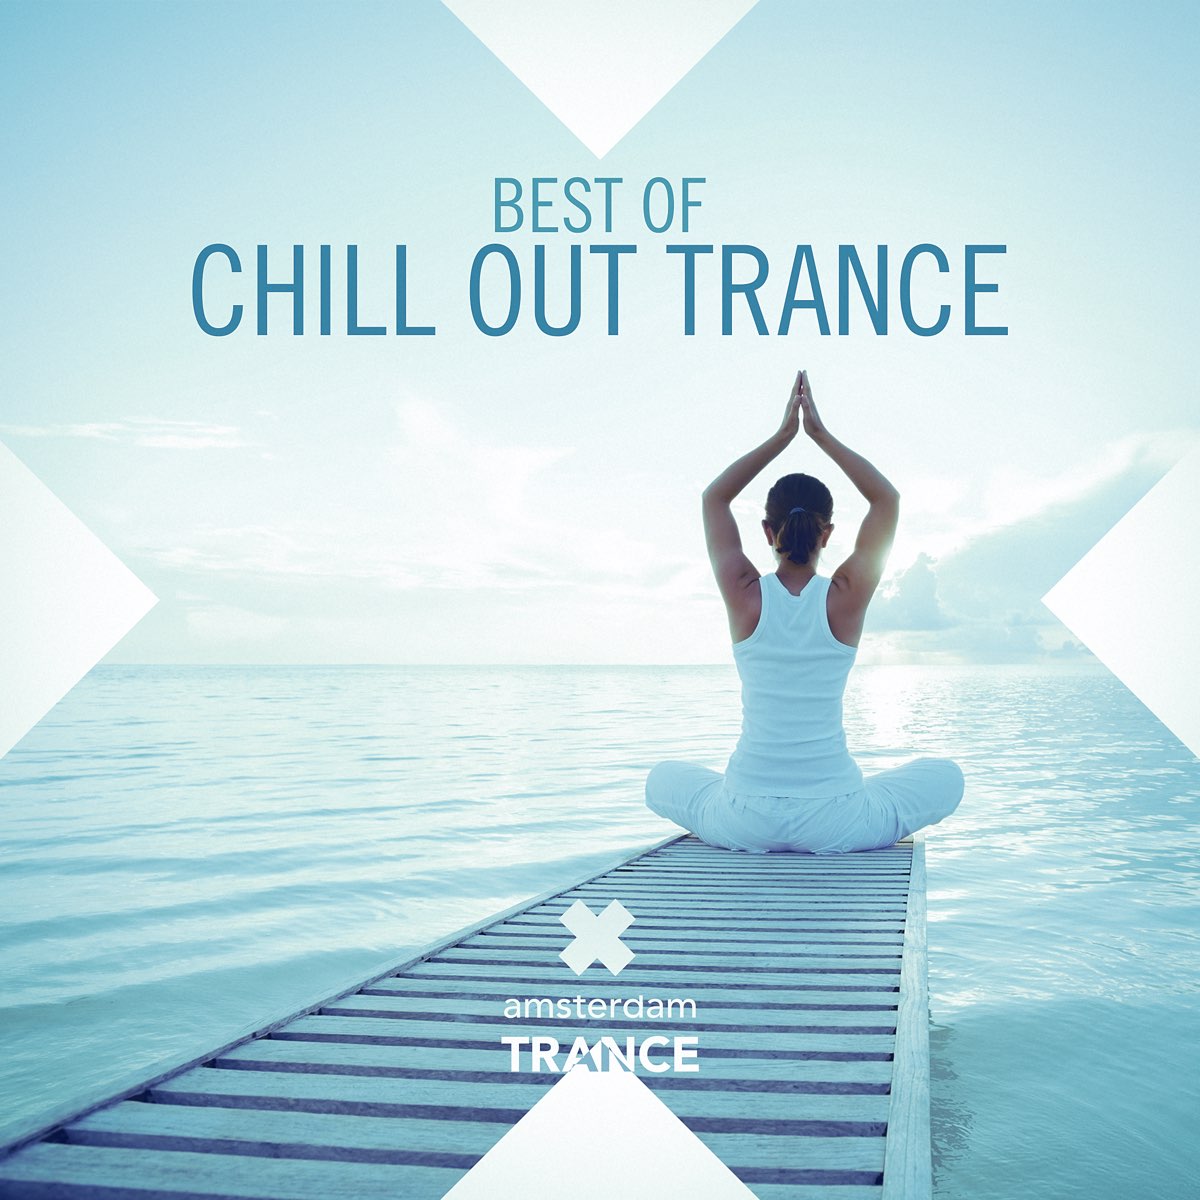 Stand chillout. Chillout Trance. Vocal Trance Chillout. Chill надпись. Chillout картинки.